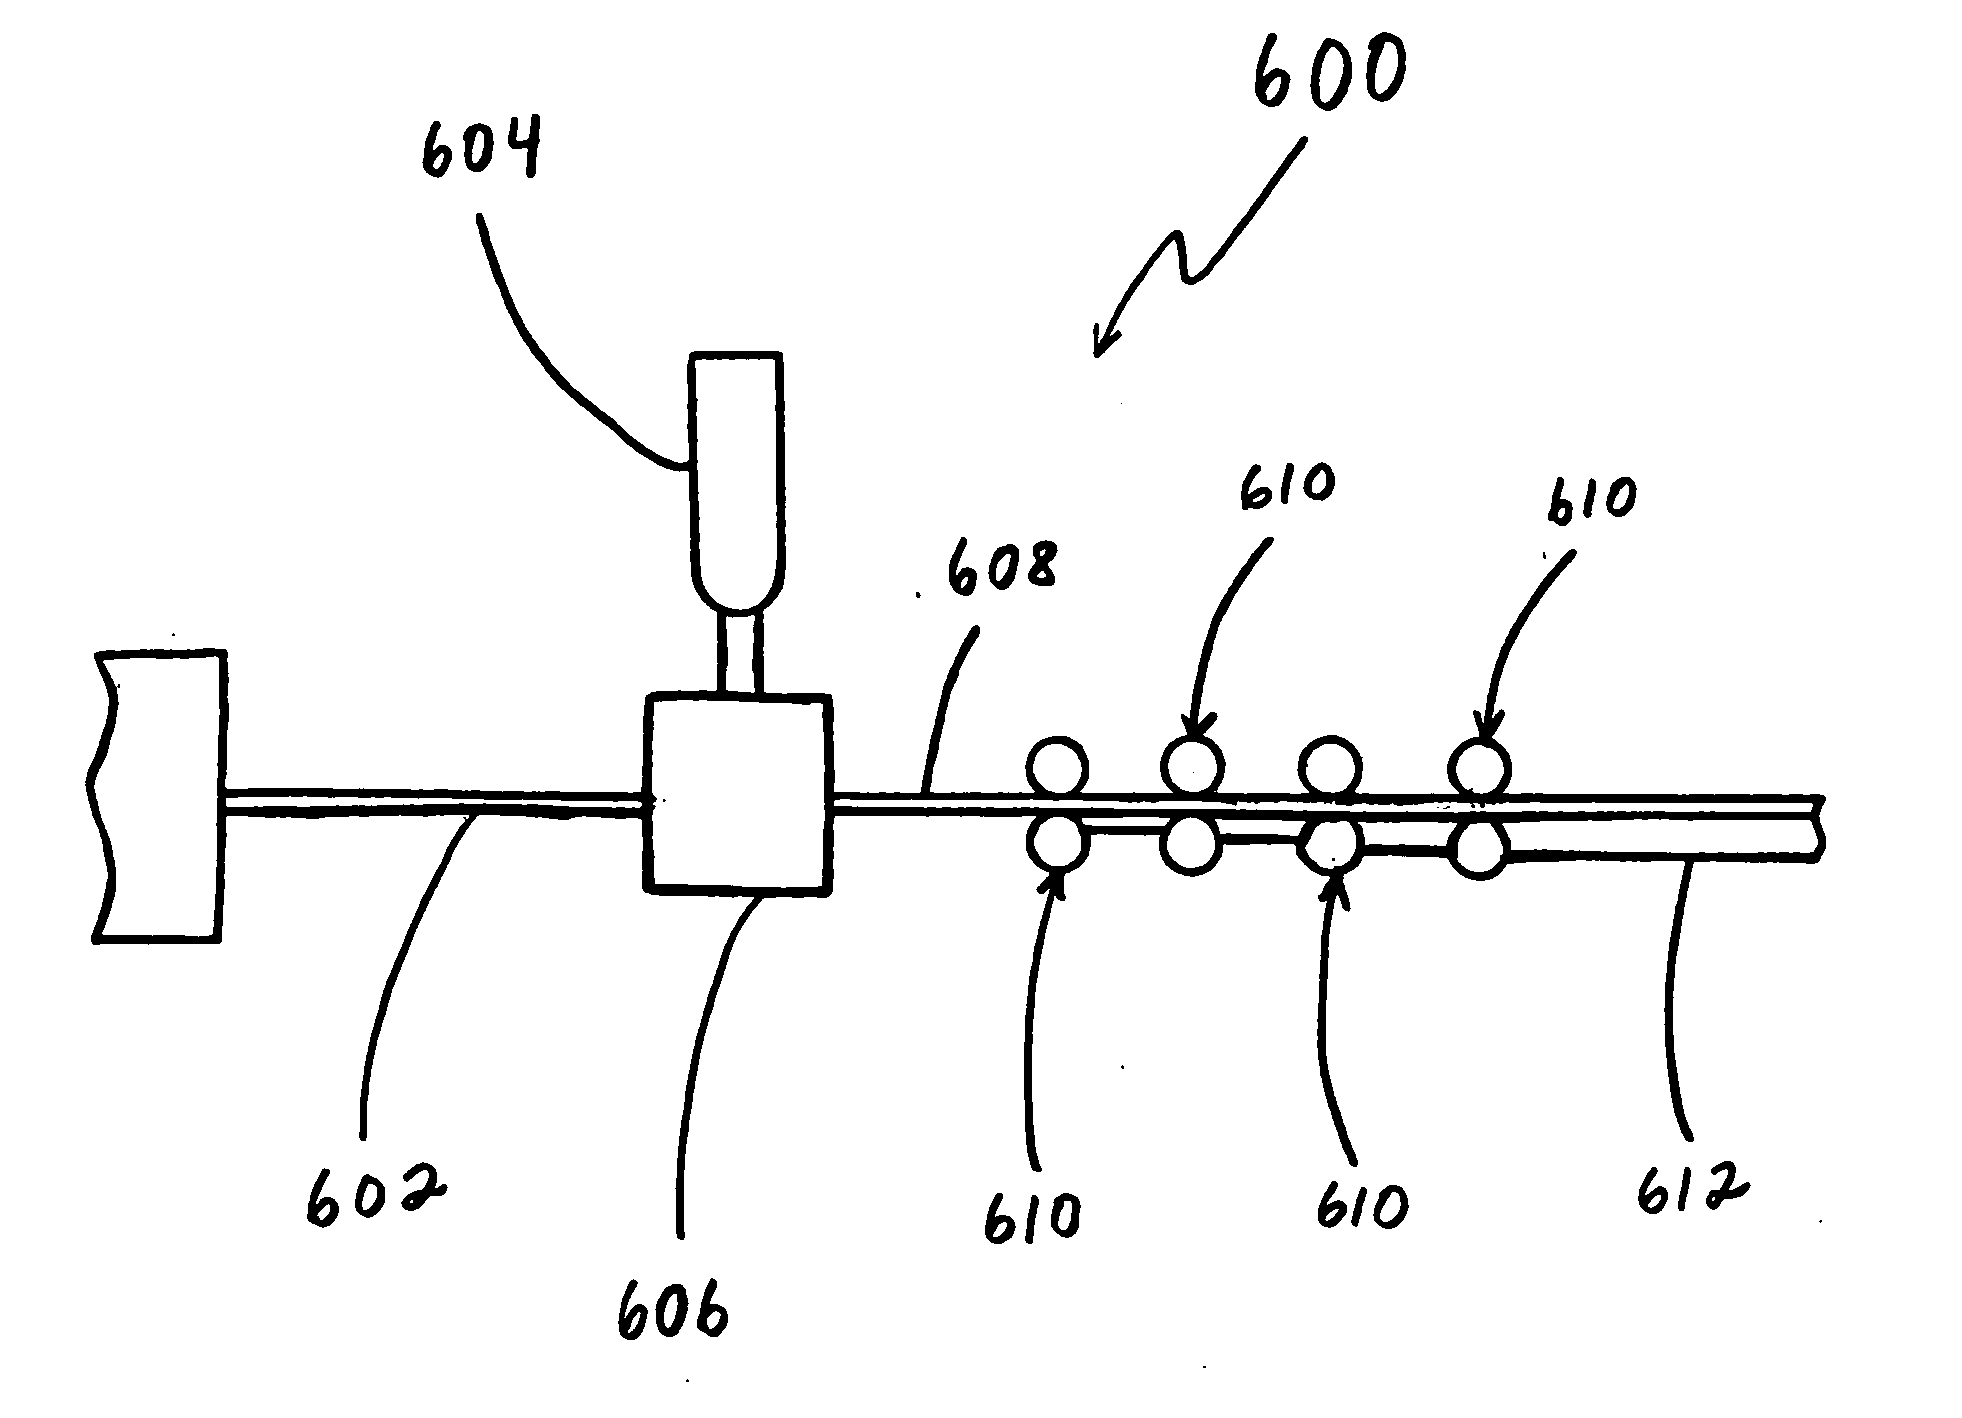 Method of manufacturing a metal-reinforced plastic panel